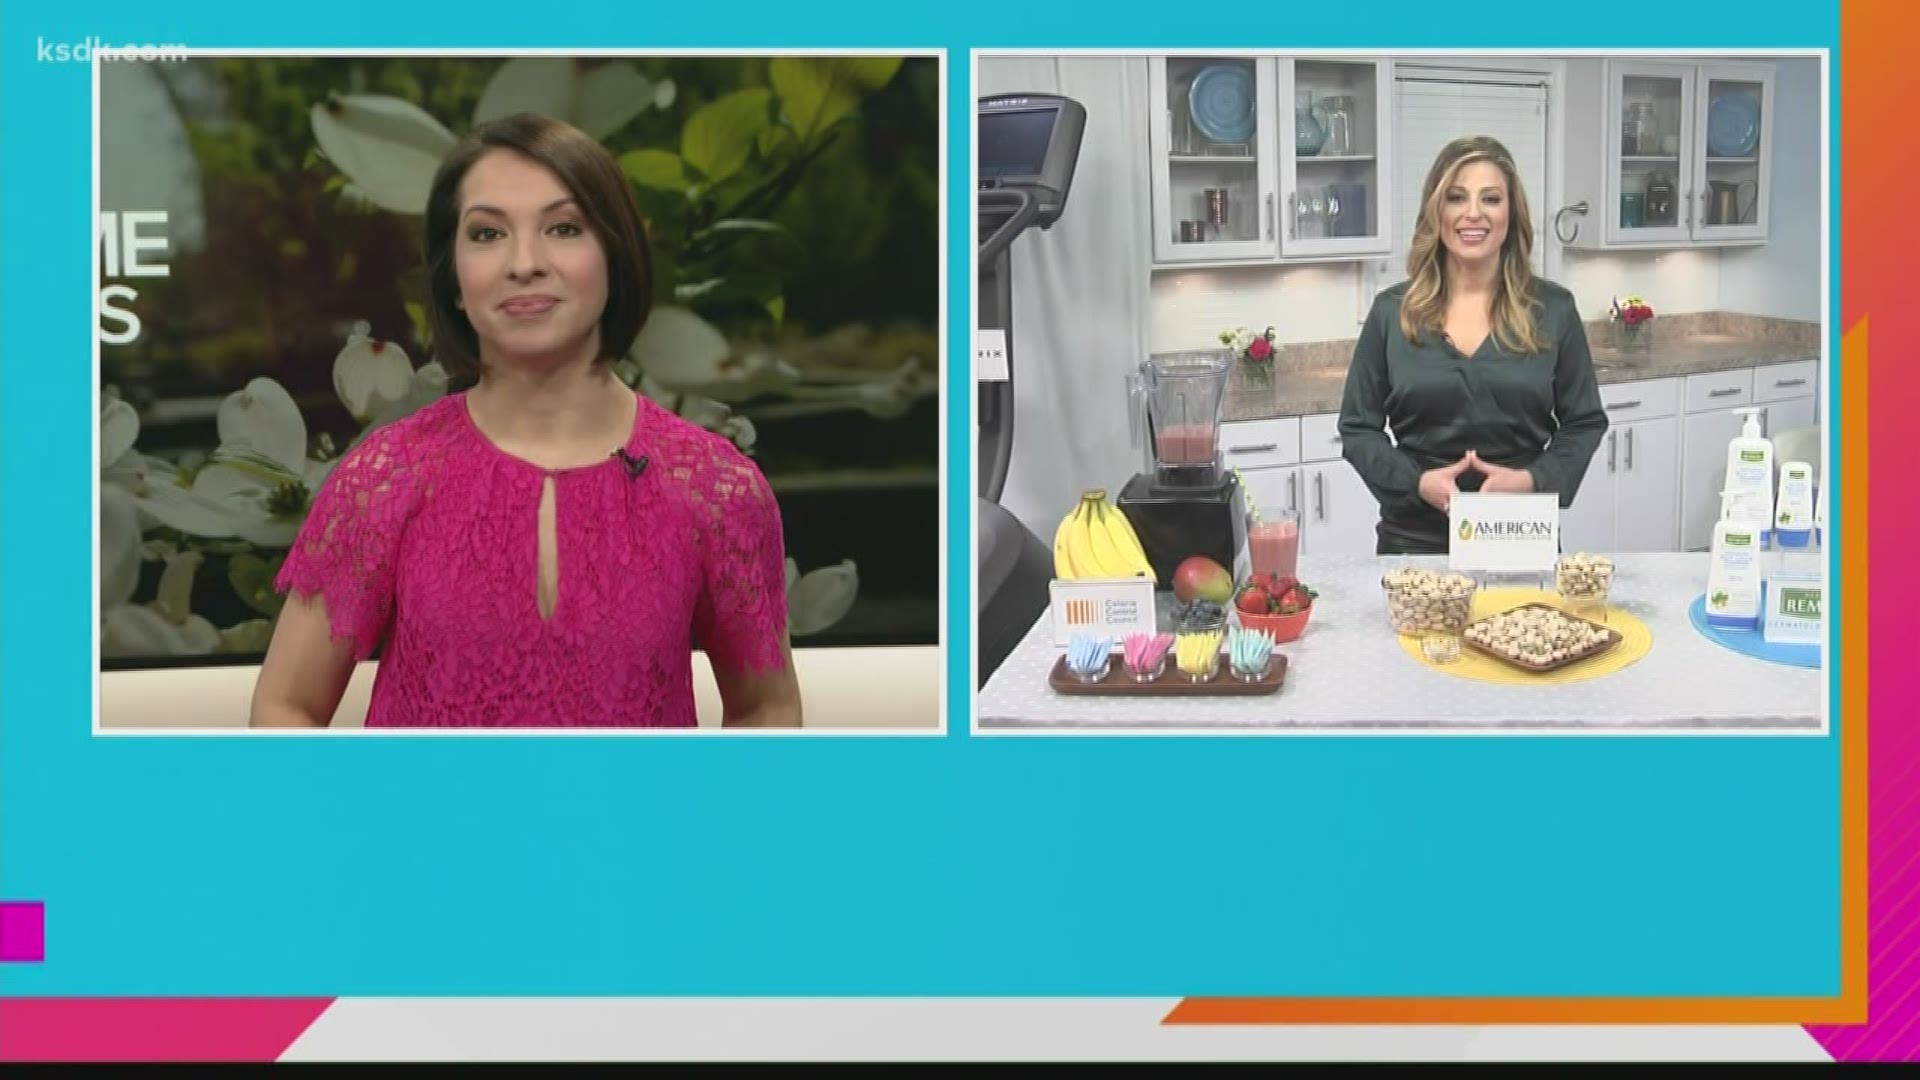 Find out what lifestyle expert Valerie Greenberg recommends to get your new year’s resolutions started.